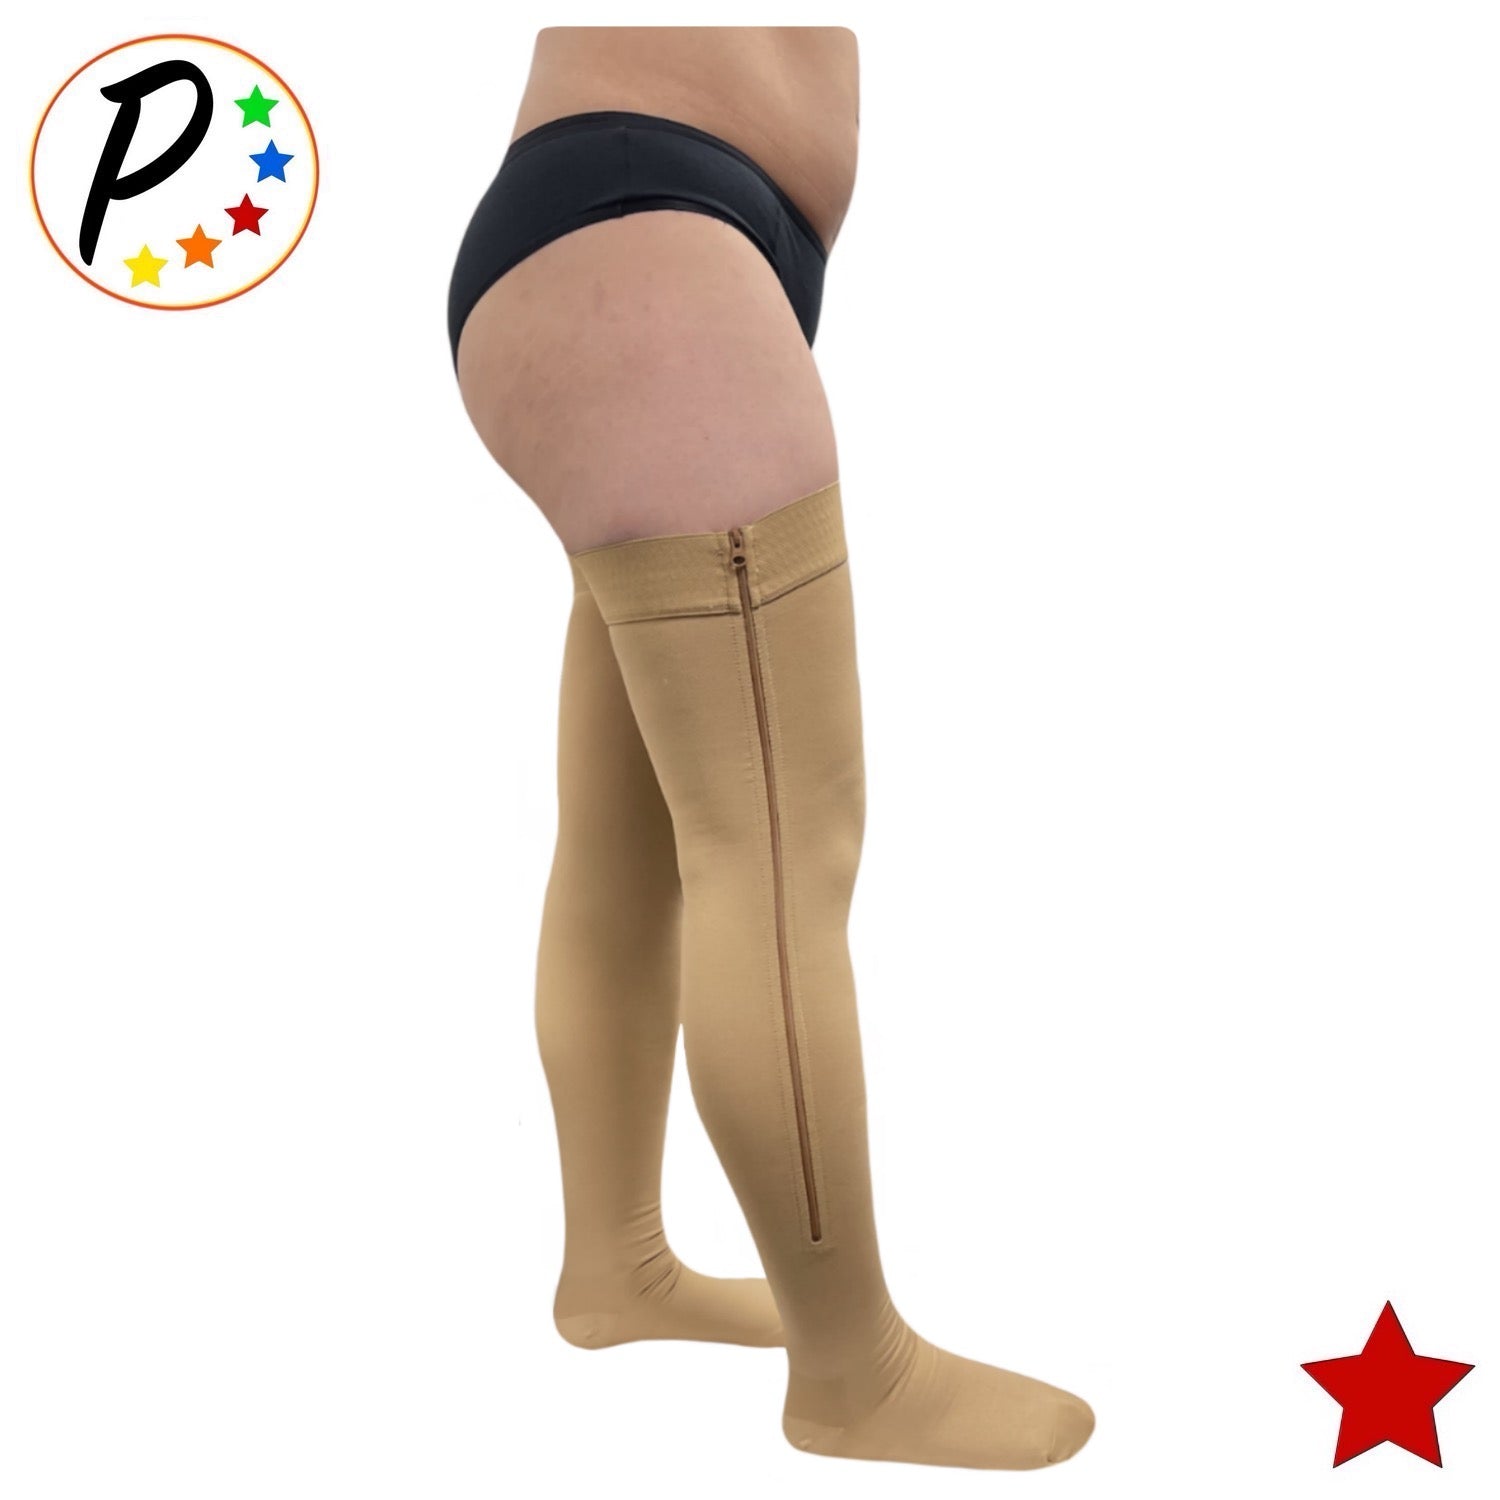 Medtex Zipper Compression Stockings High Quality fabric (YKK Zipper), For  Hospital at best price in Punjaipuliampatti